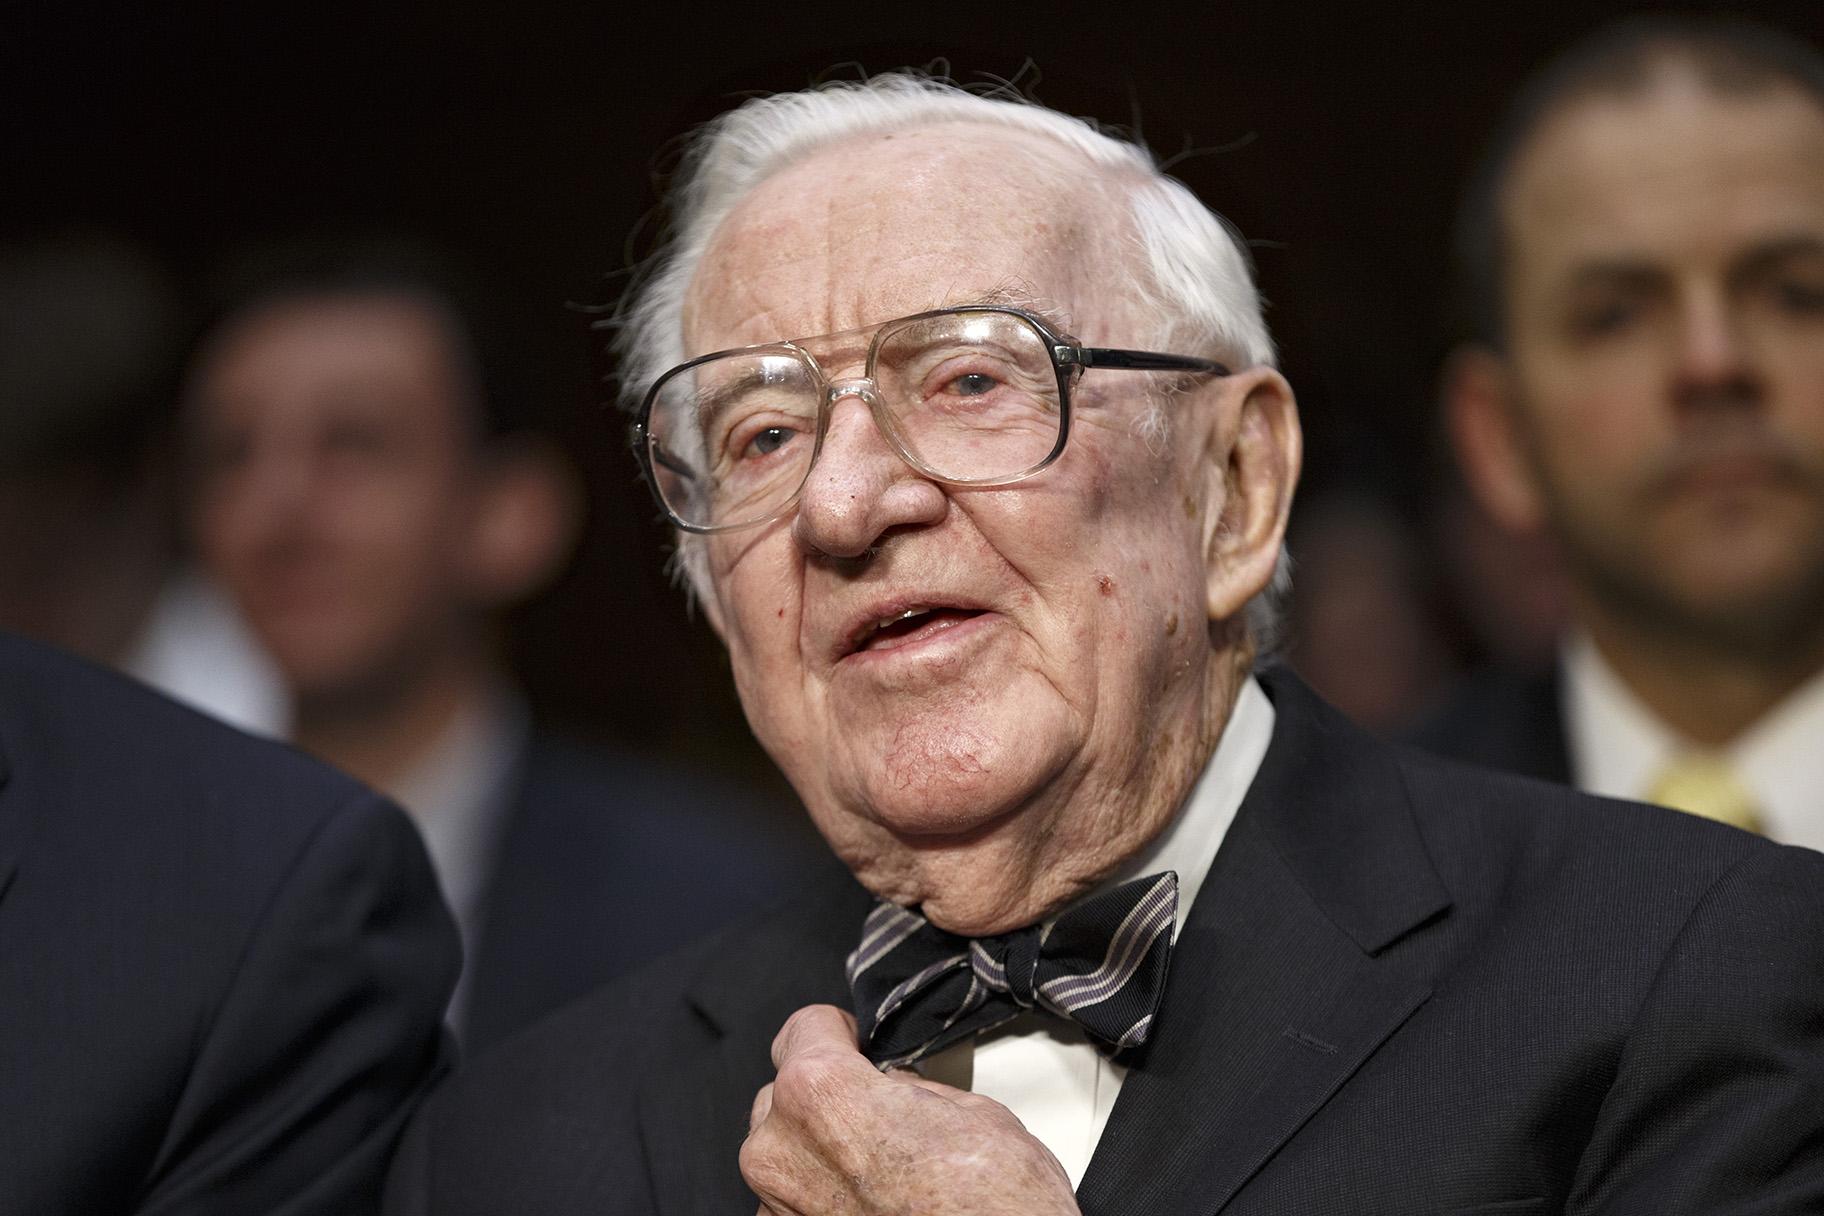 In this April 30, 2014 file photo, retired Supreme Court Justice John Paul Stevens prepares to testify on the ever-increasing amount of money spent on elections as he appears before the Senate Rules Committee on Capitol Hill in Washington. (AP Photo, File)